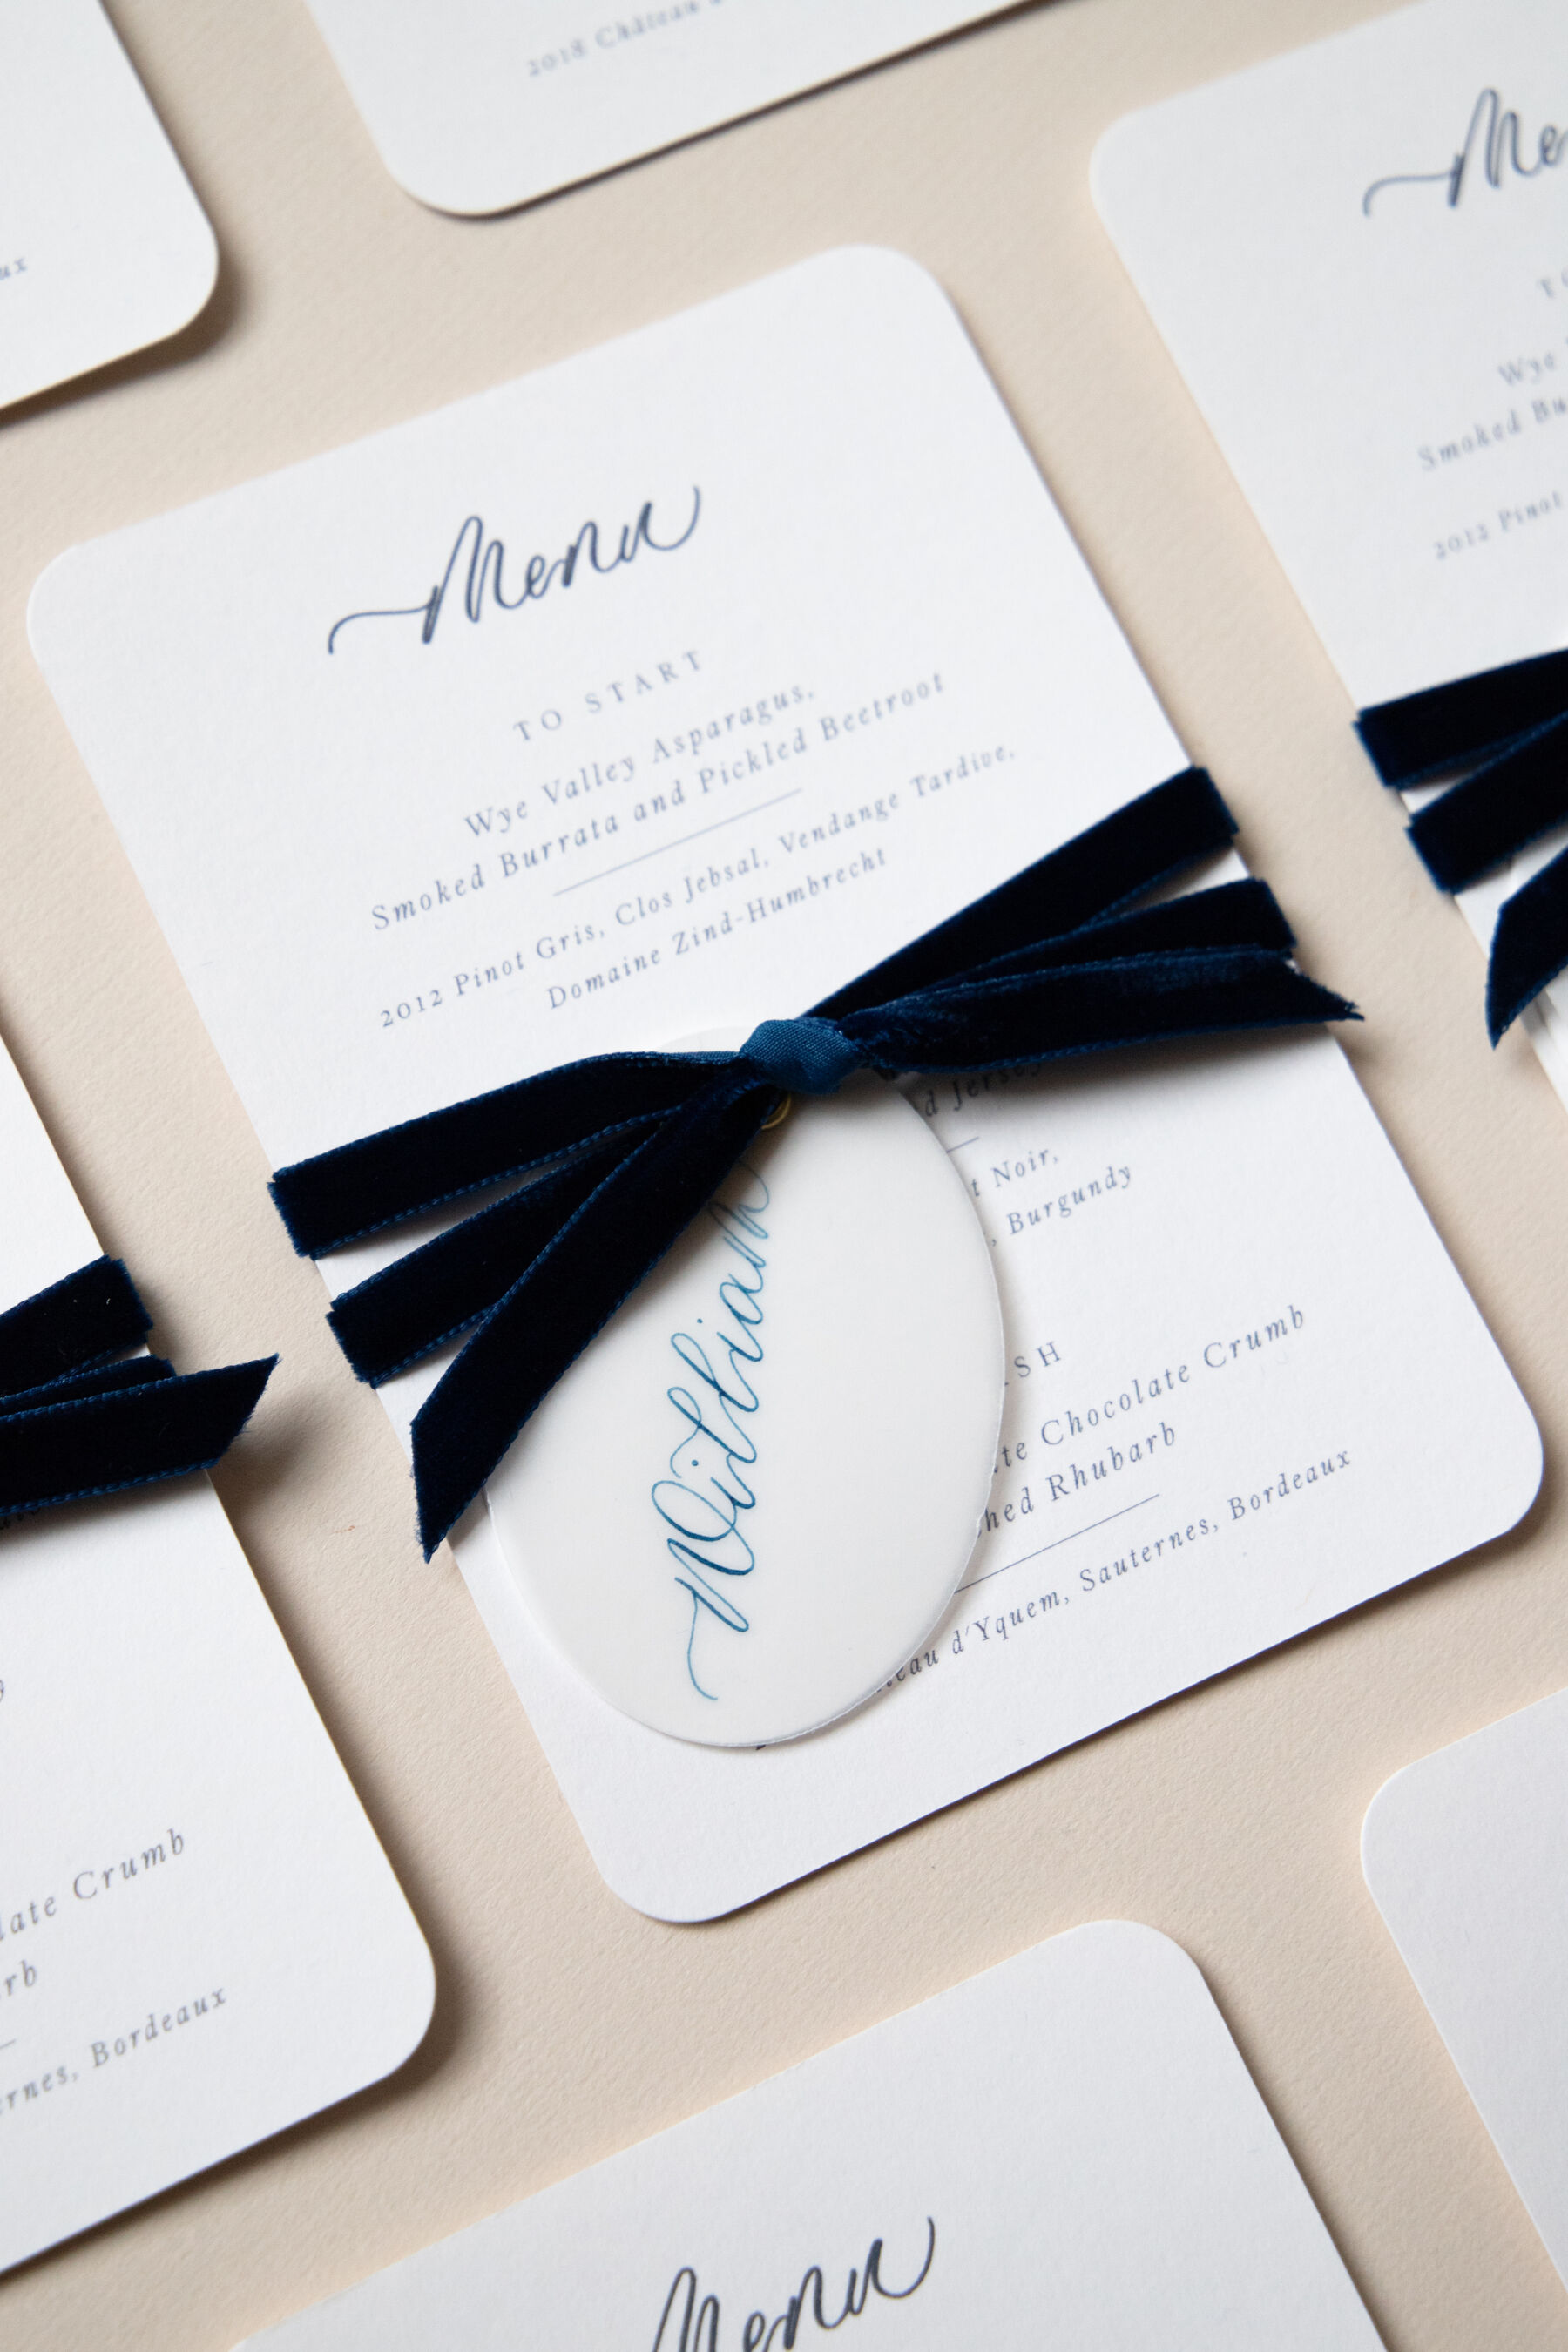 Bespoke menu card with calligraphy place tag.